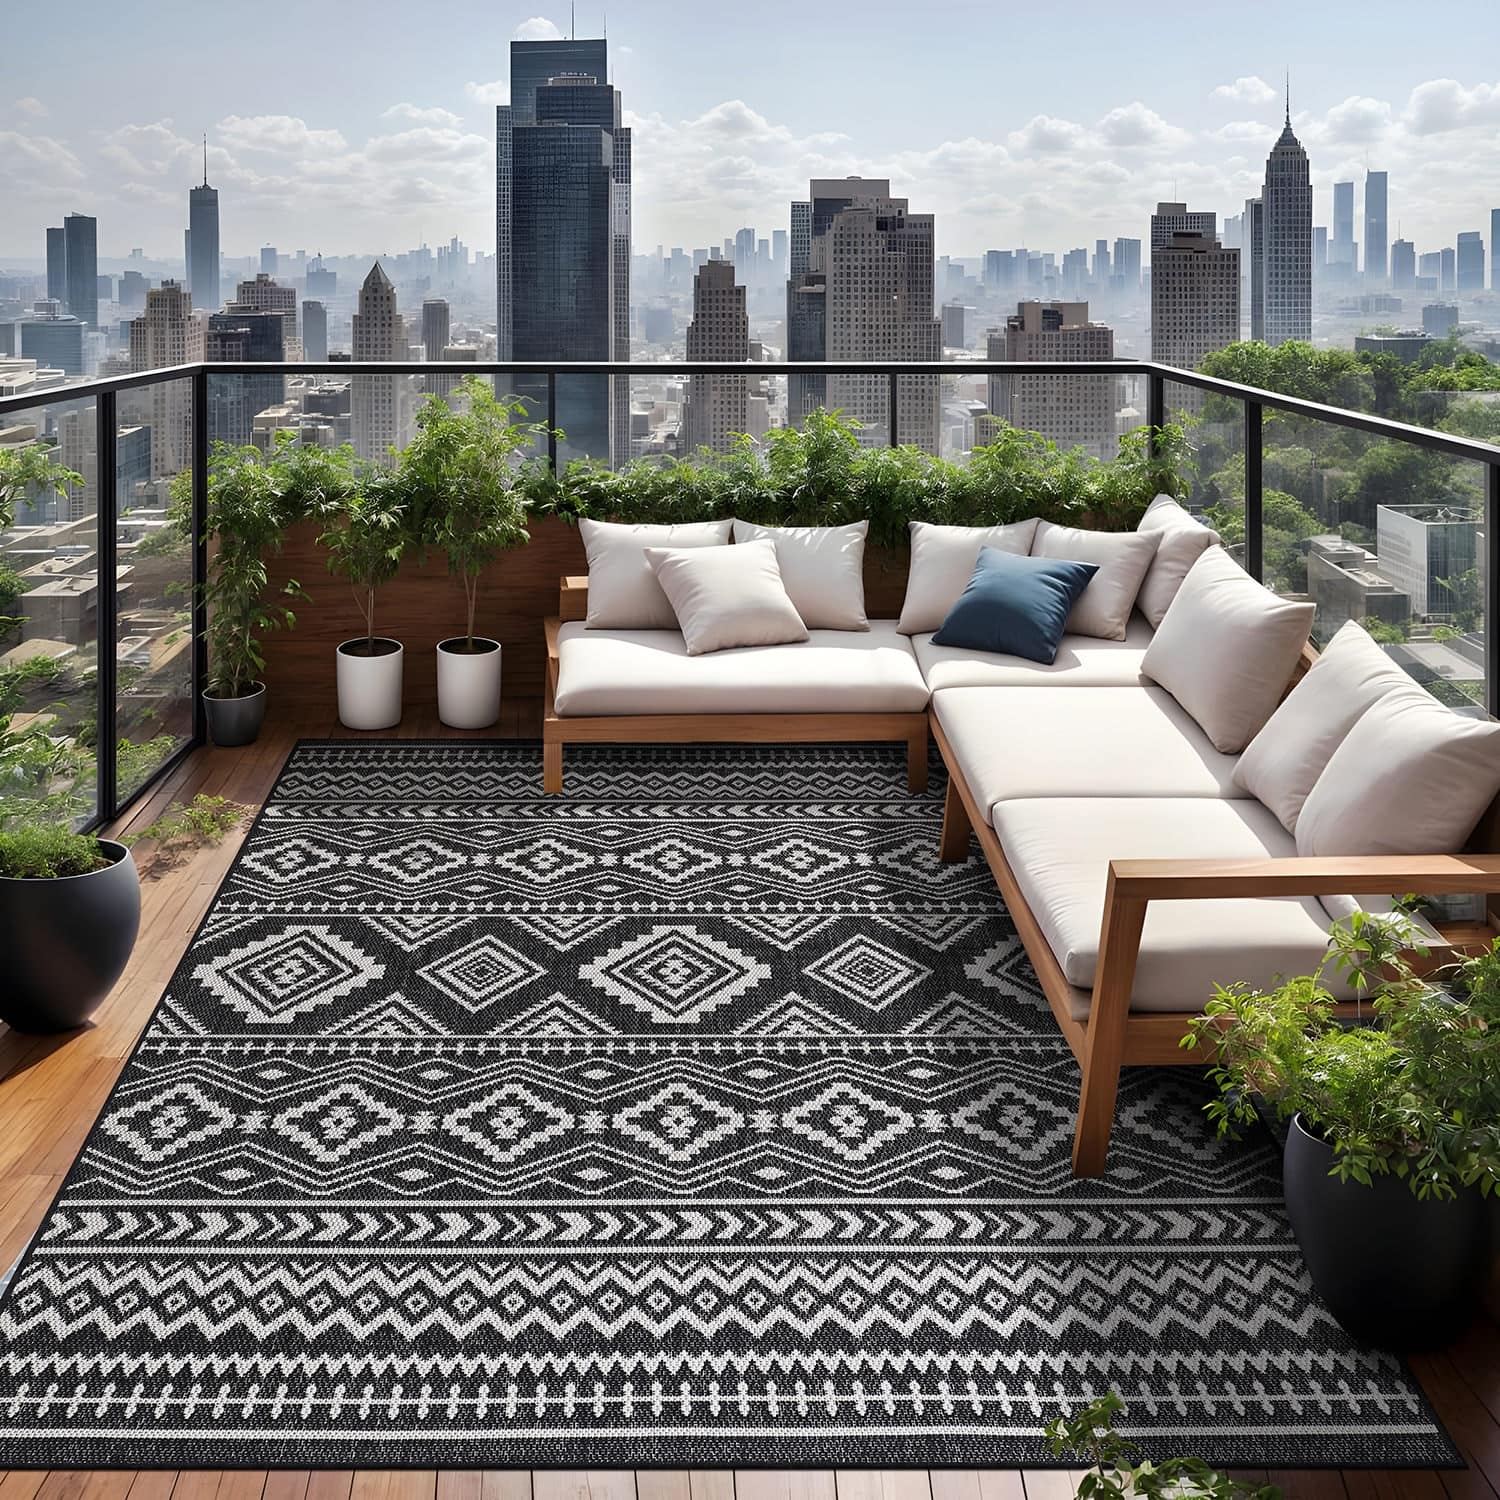 Beverly Rug Black White Boho Moroccan Indoor Outdoor Area Rug for Patio ...